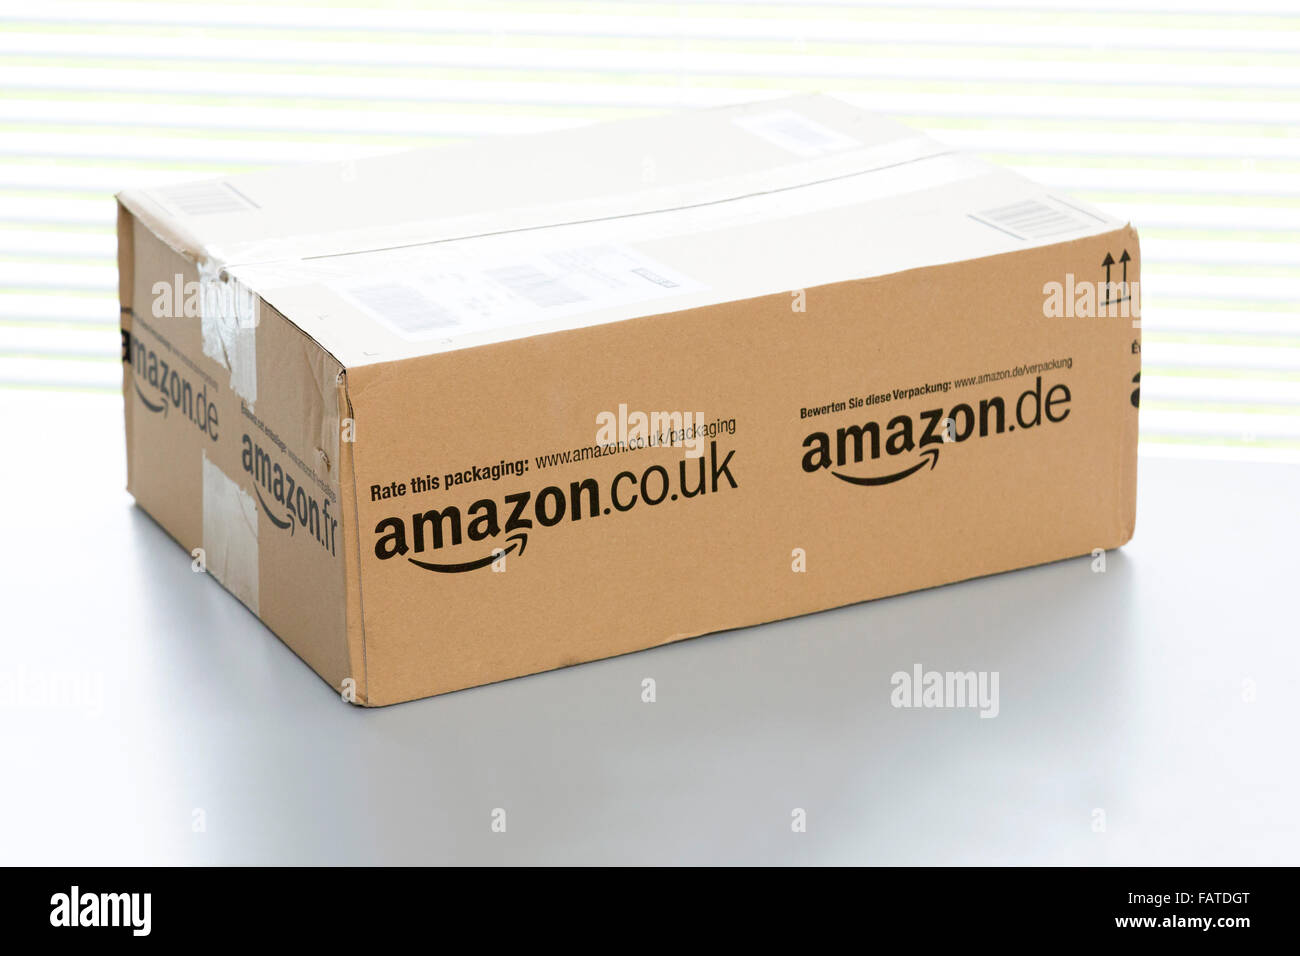 Amazon Parcel High Resolution Stock Photography and Images - Alamy